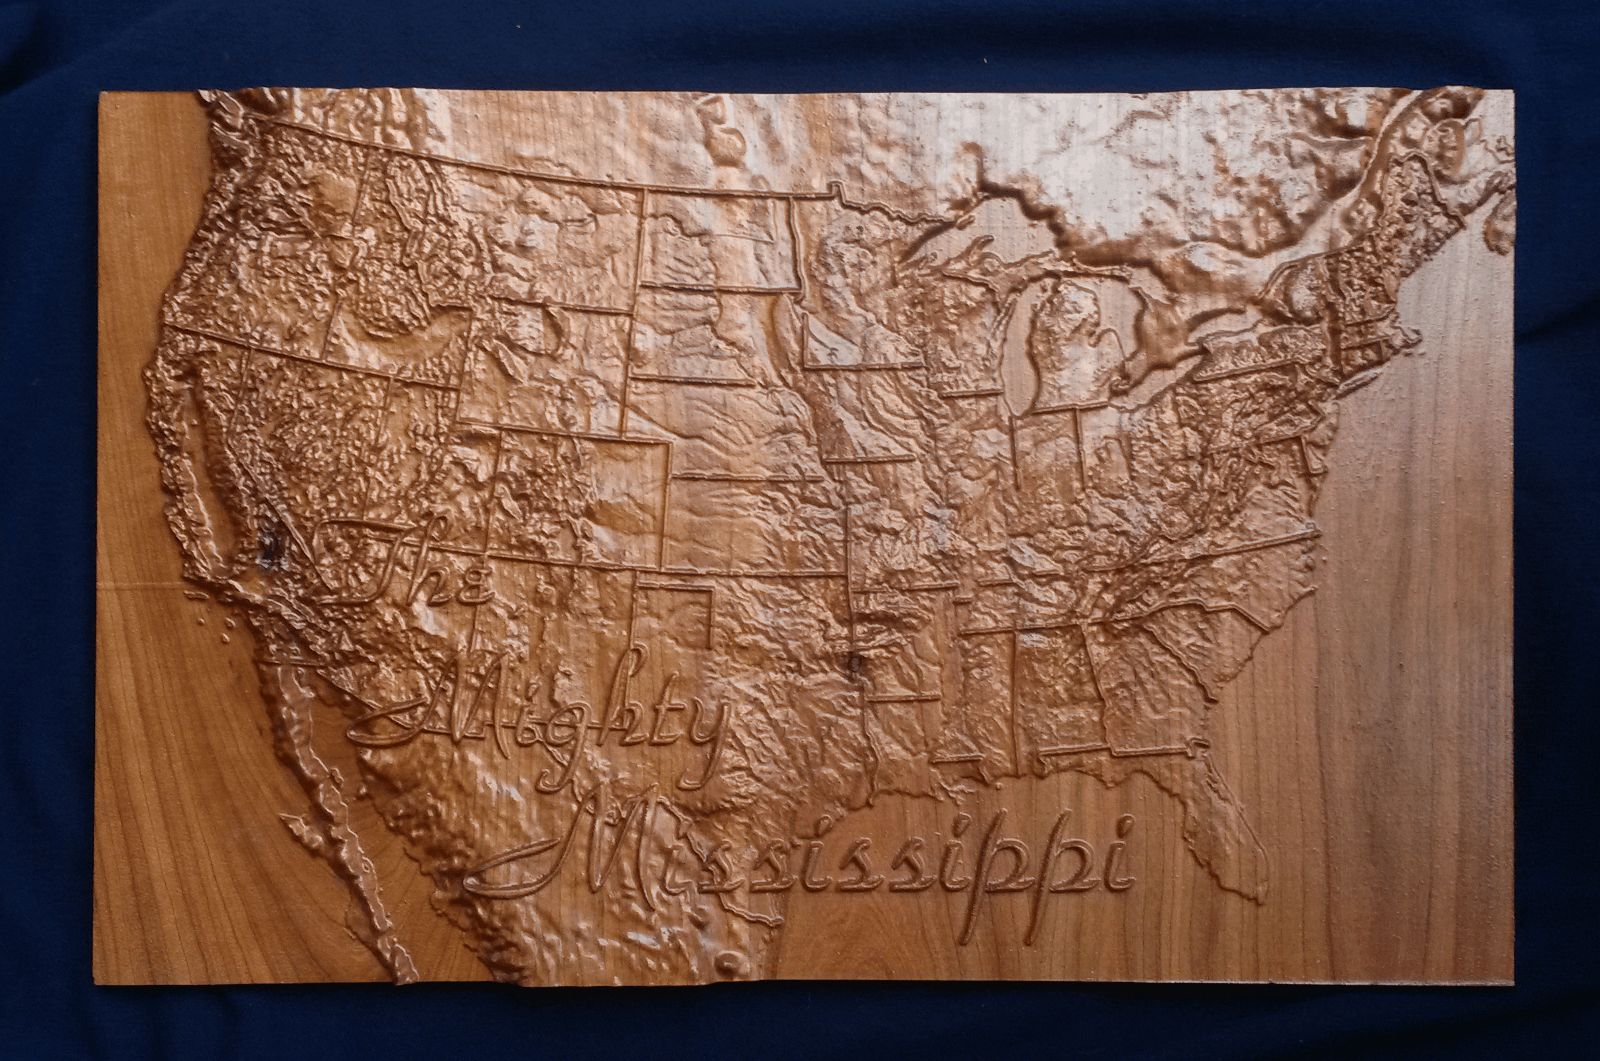 Picture of carved map of the United States showing the Mississippi River's extents